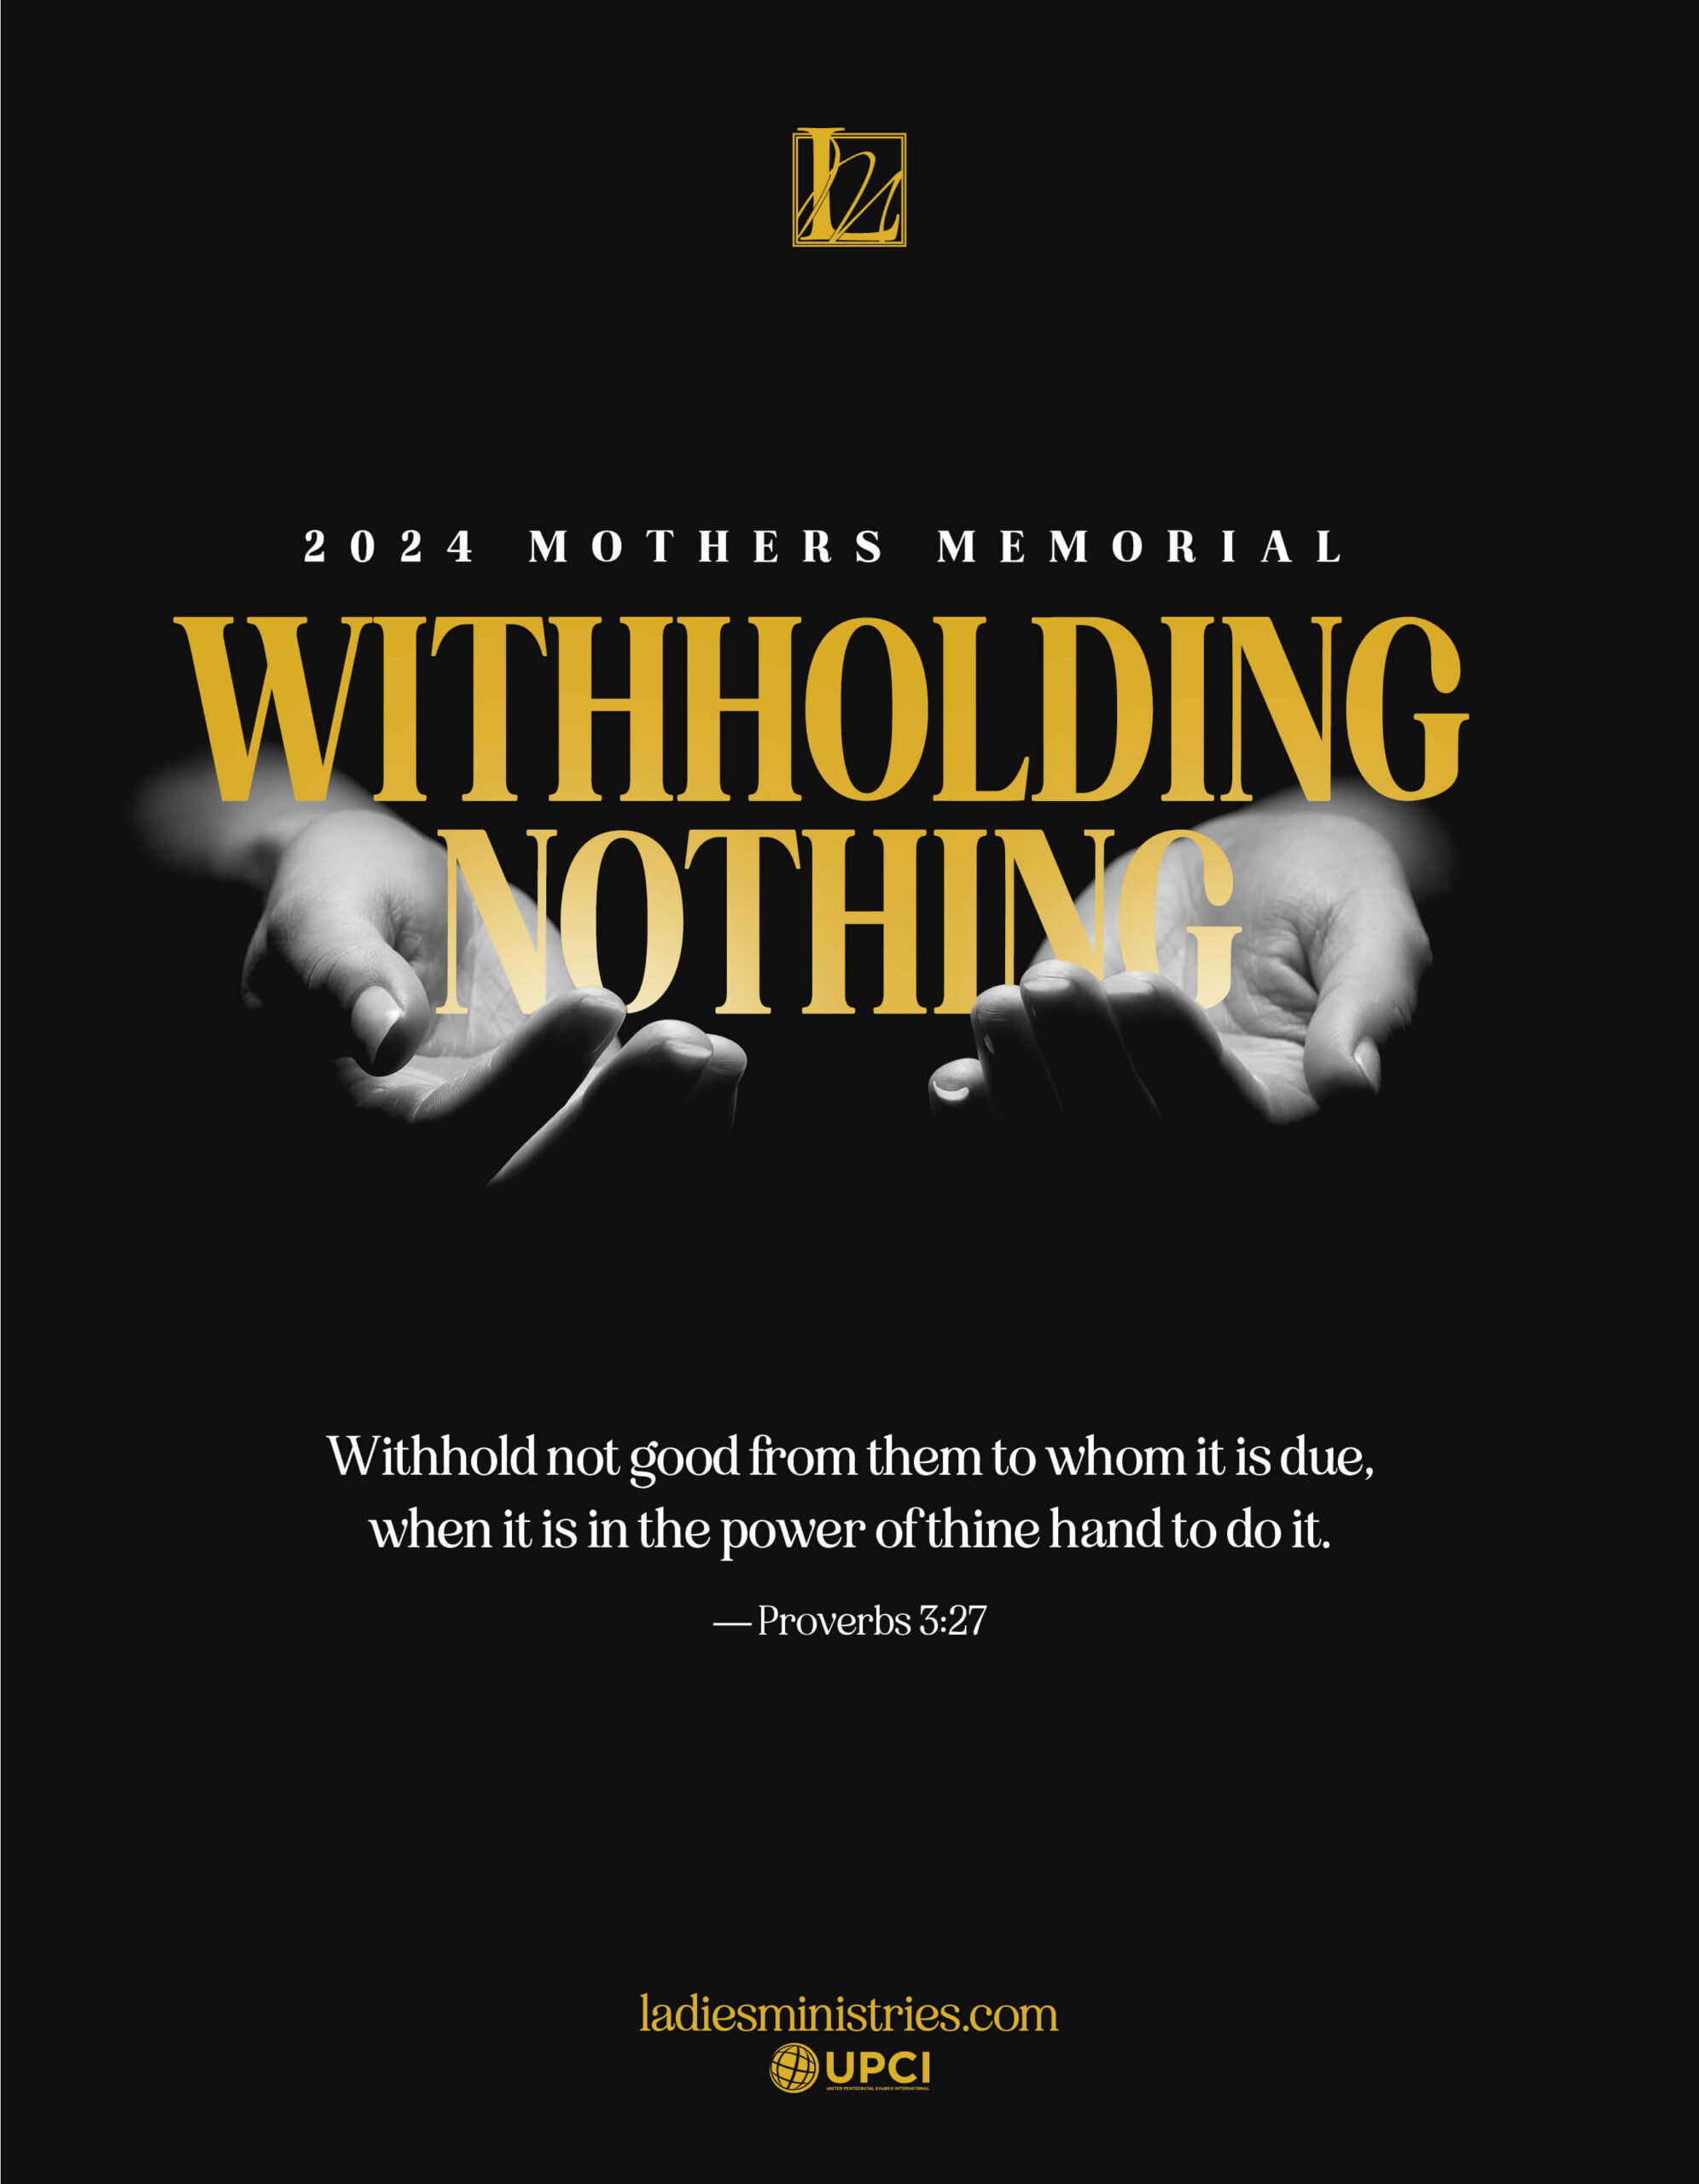 lm-withholding-nothing-Flyer